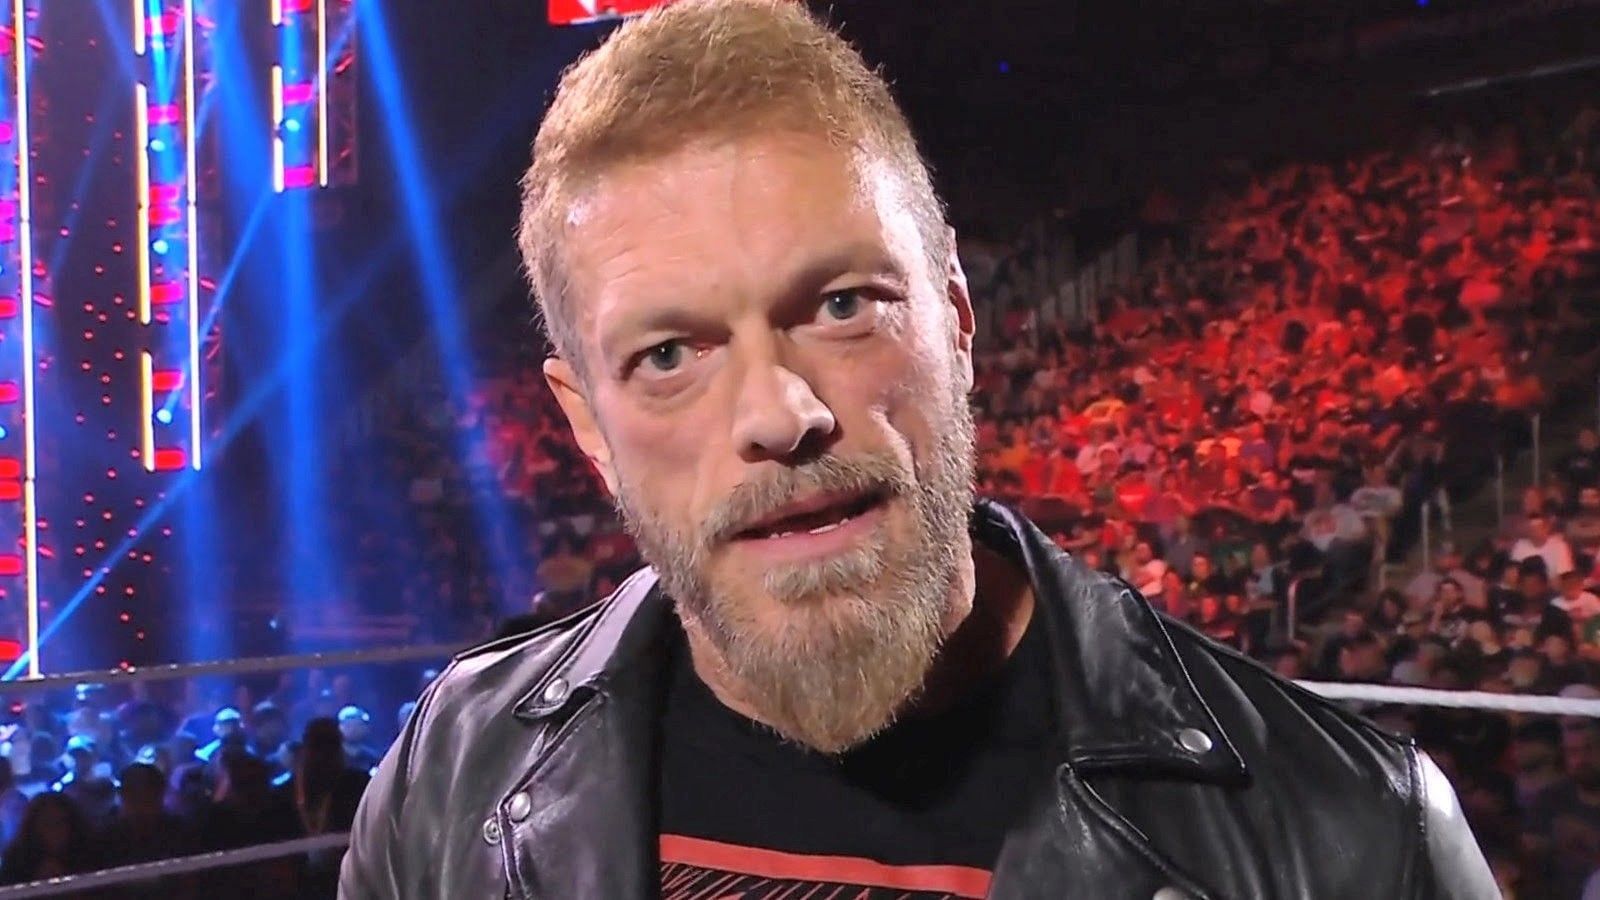 Edge is an 11-time world champion in WWE